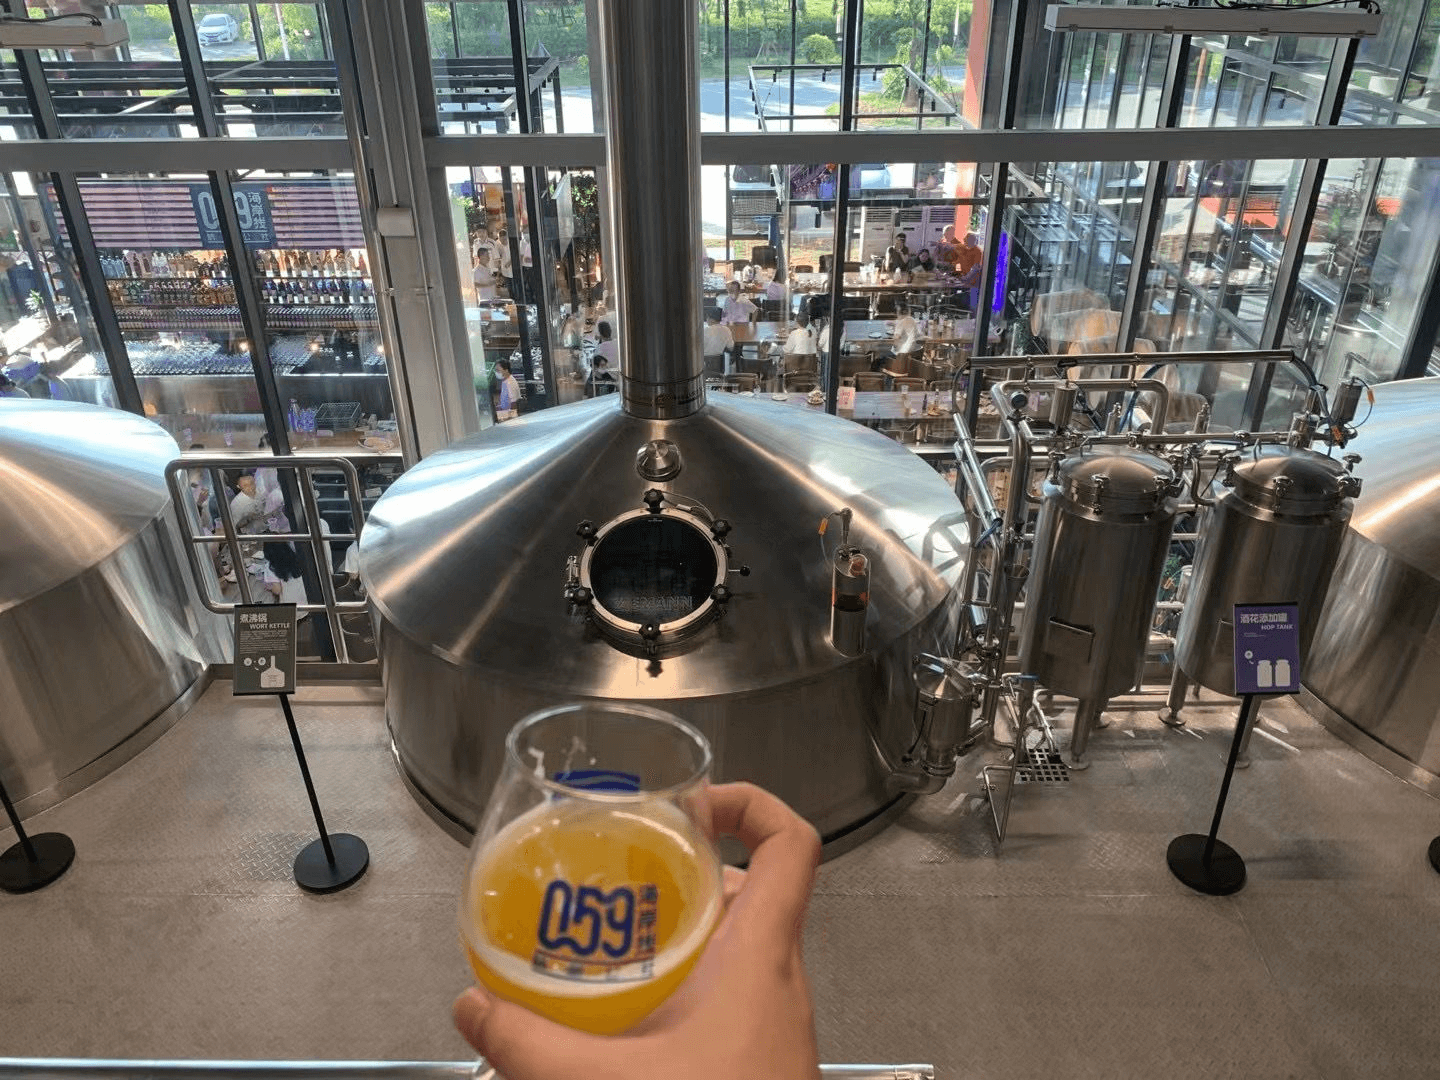 A picture of 059 Brewery